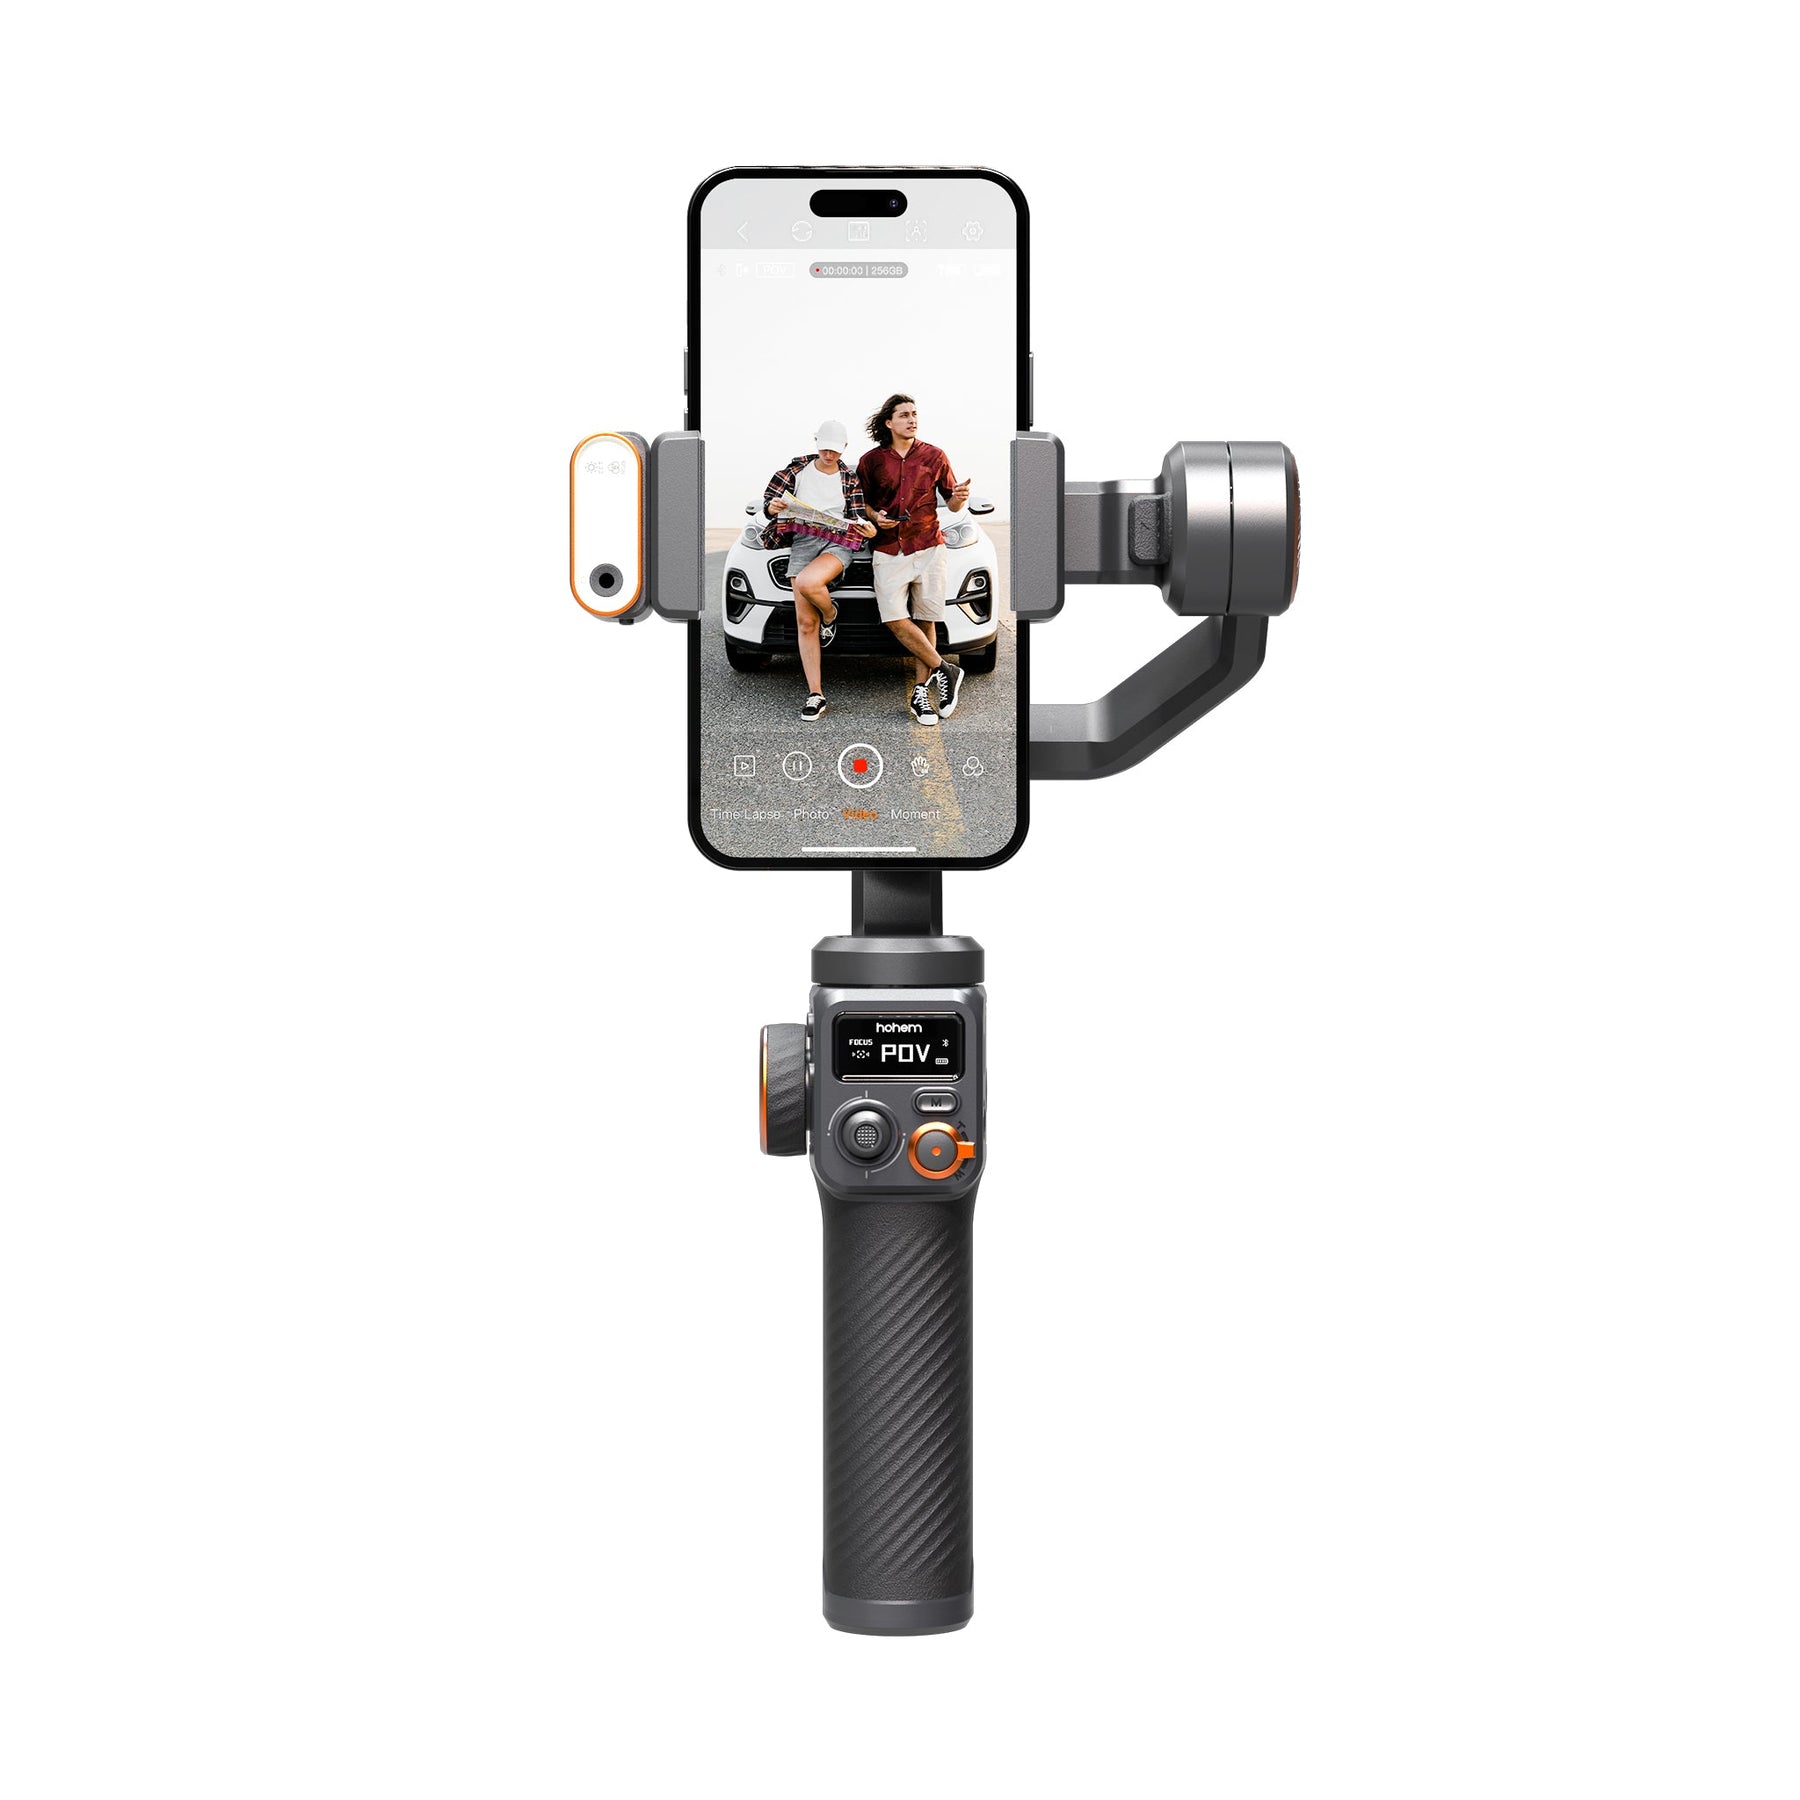 DJI Osmo Mobile 7: The Next Big Thing In Mobile Gimbals